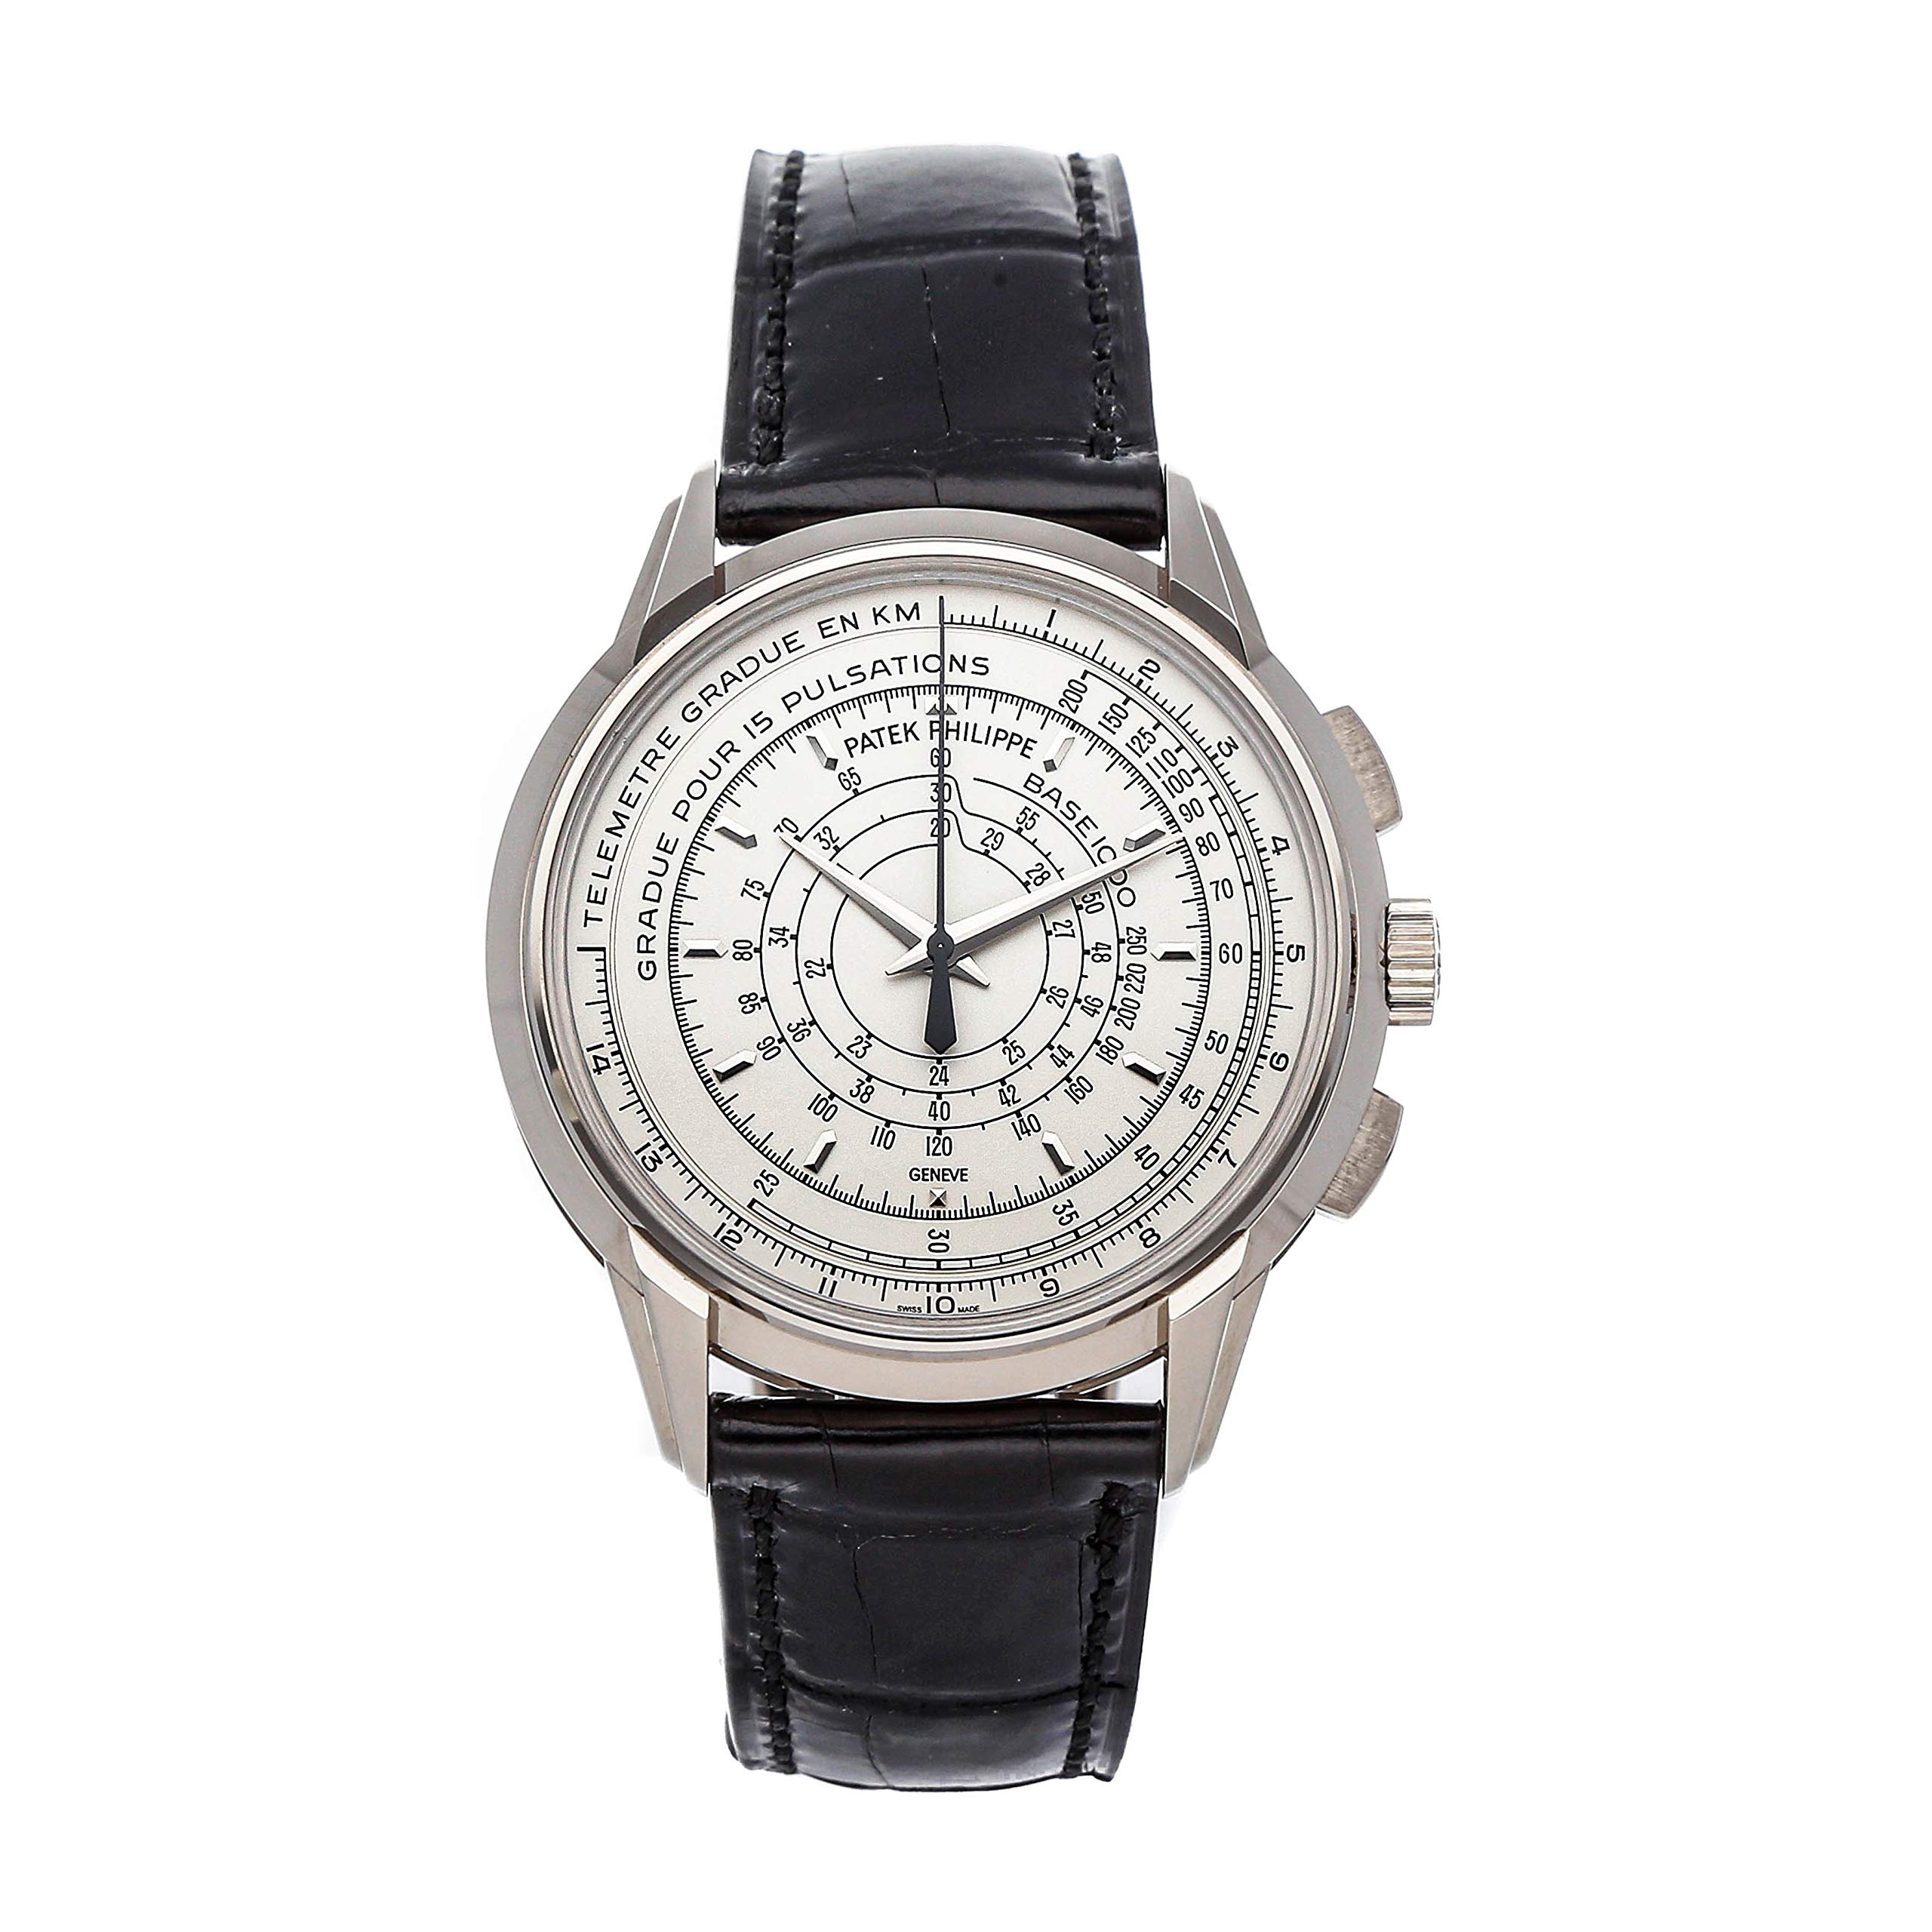 Patek Philippe Chronograph Mechanical(Automatic) Silver Dial Watch